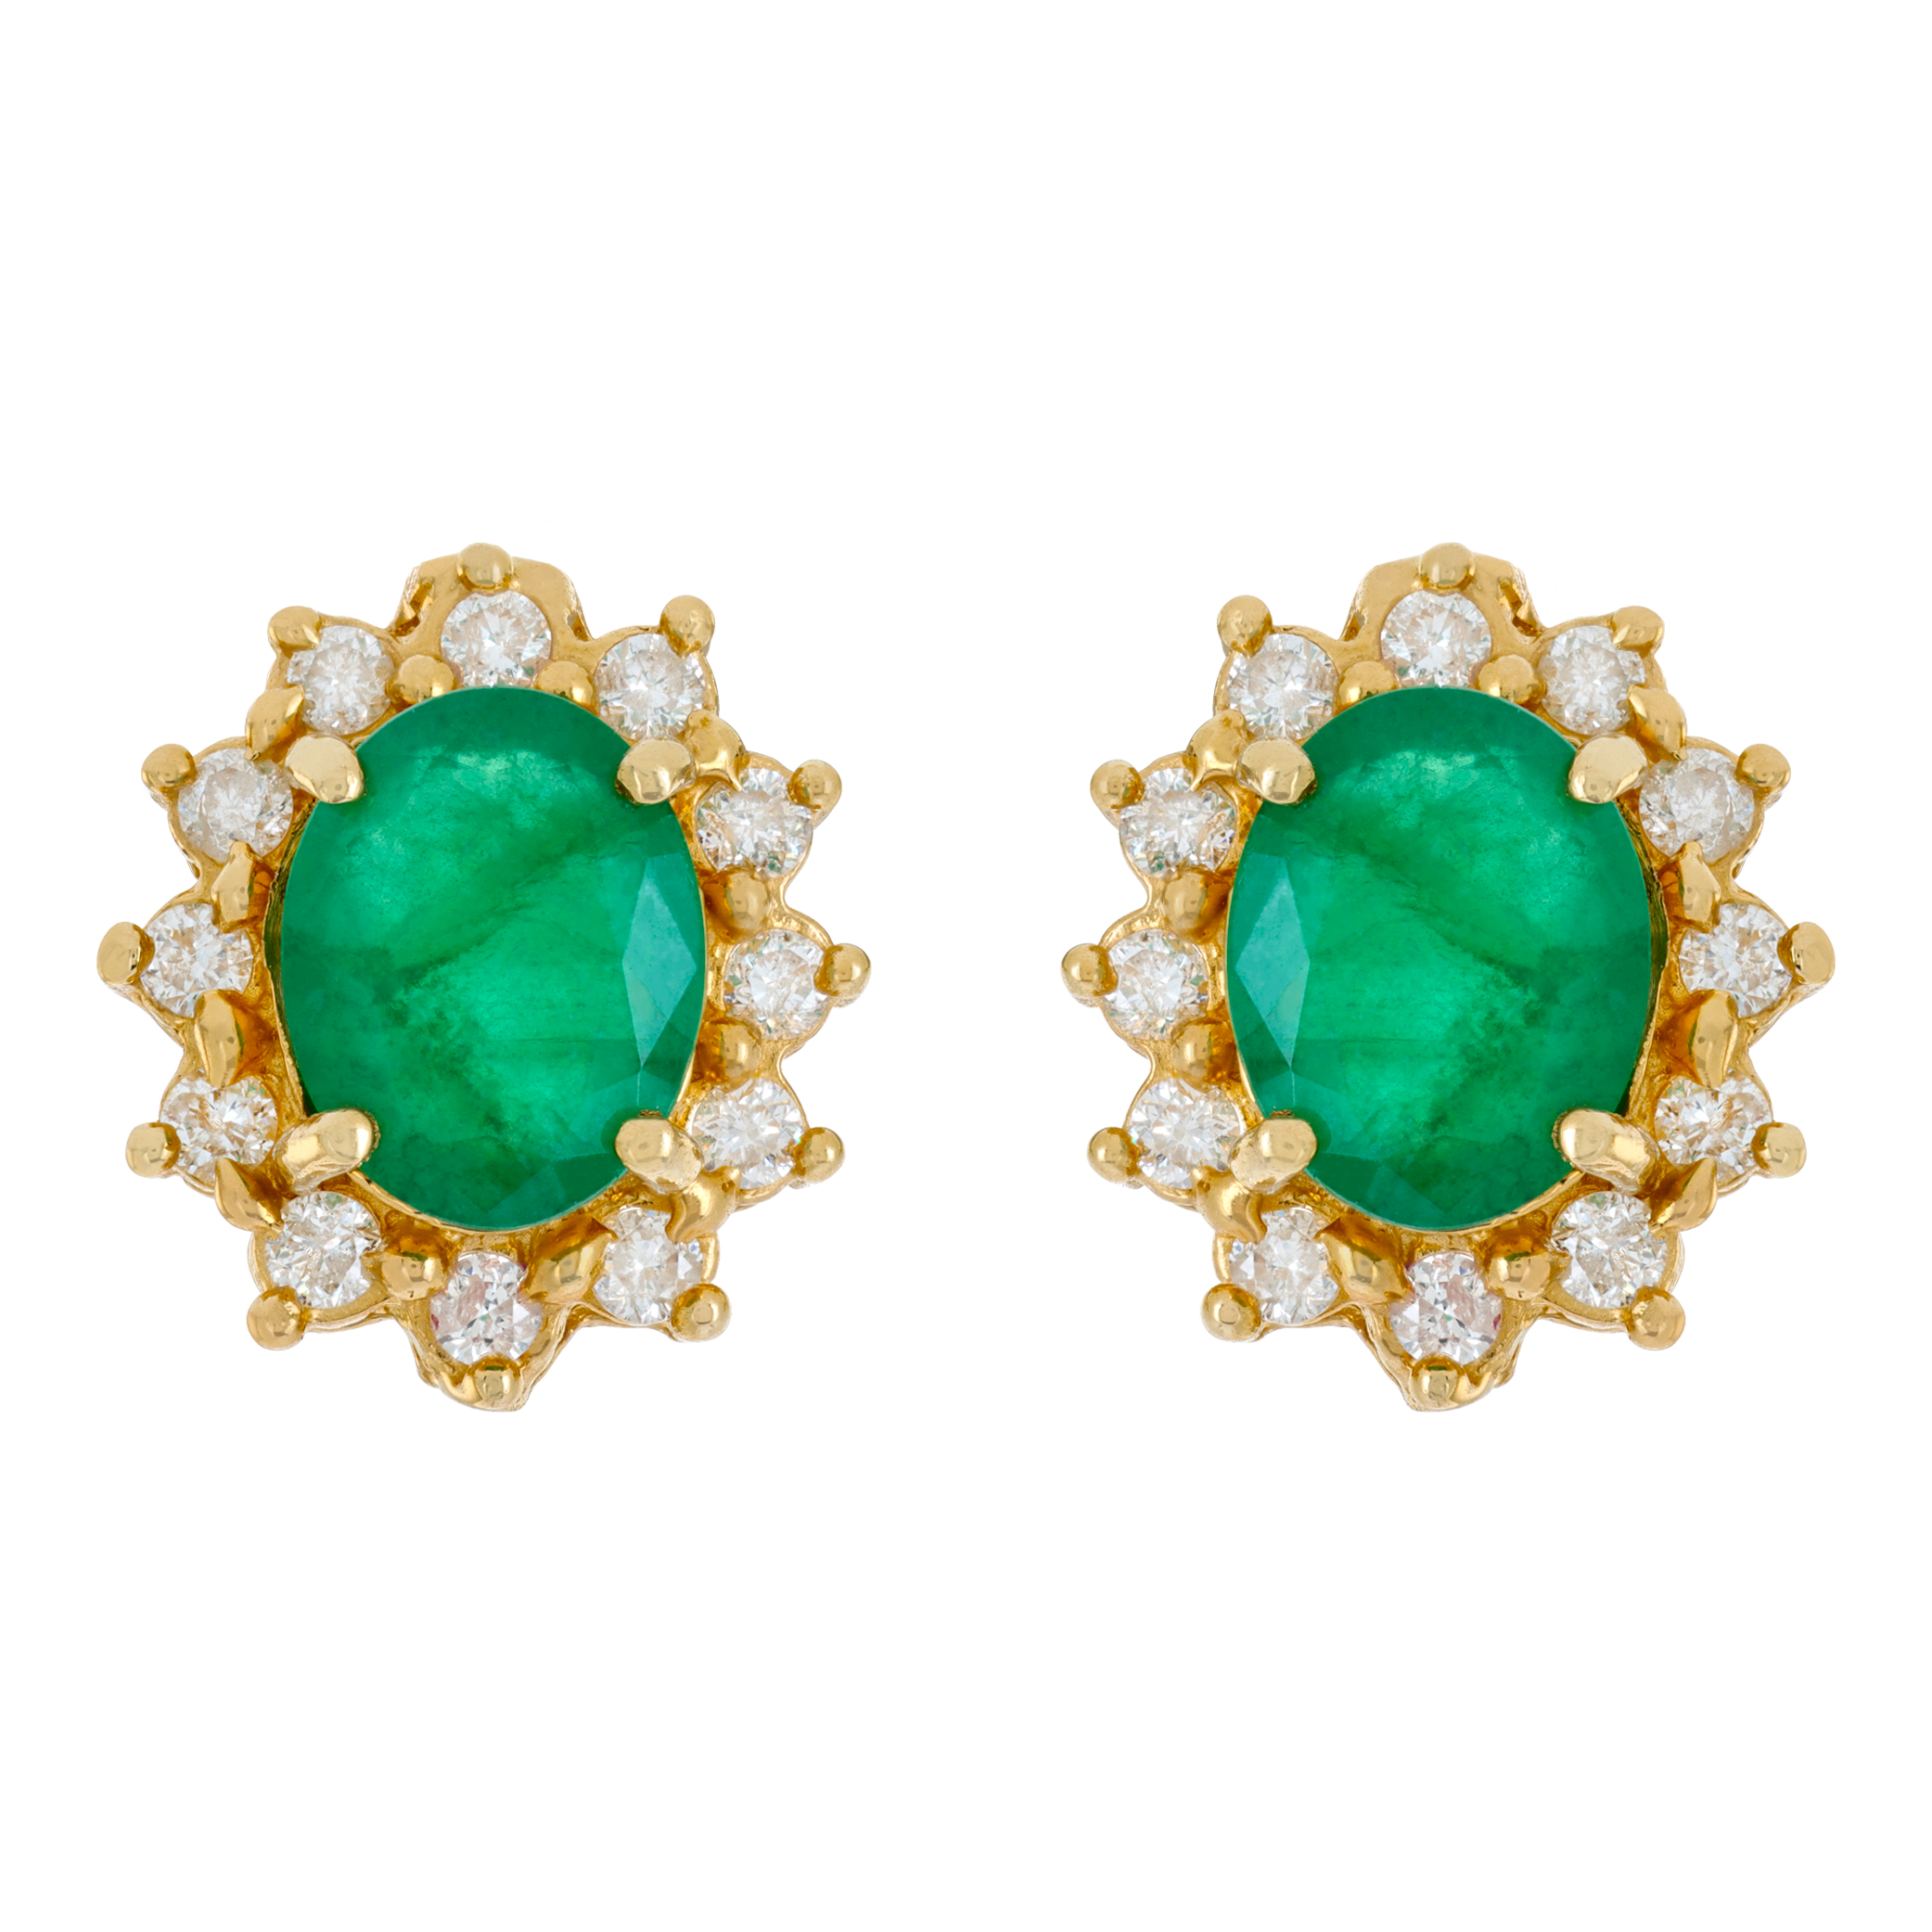 Emerald and diamond earrings in 14k yellow gold (Stones)